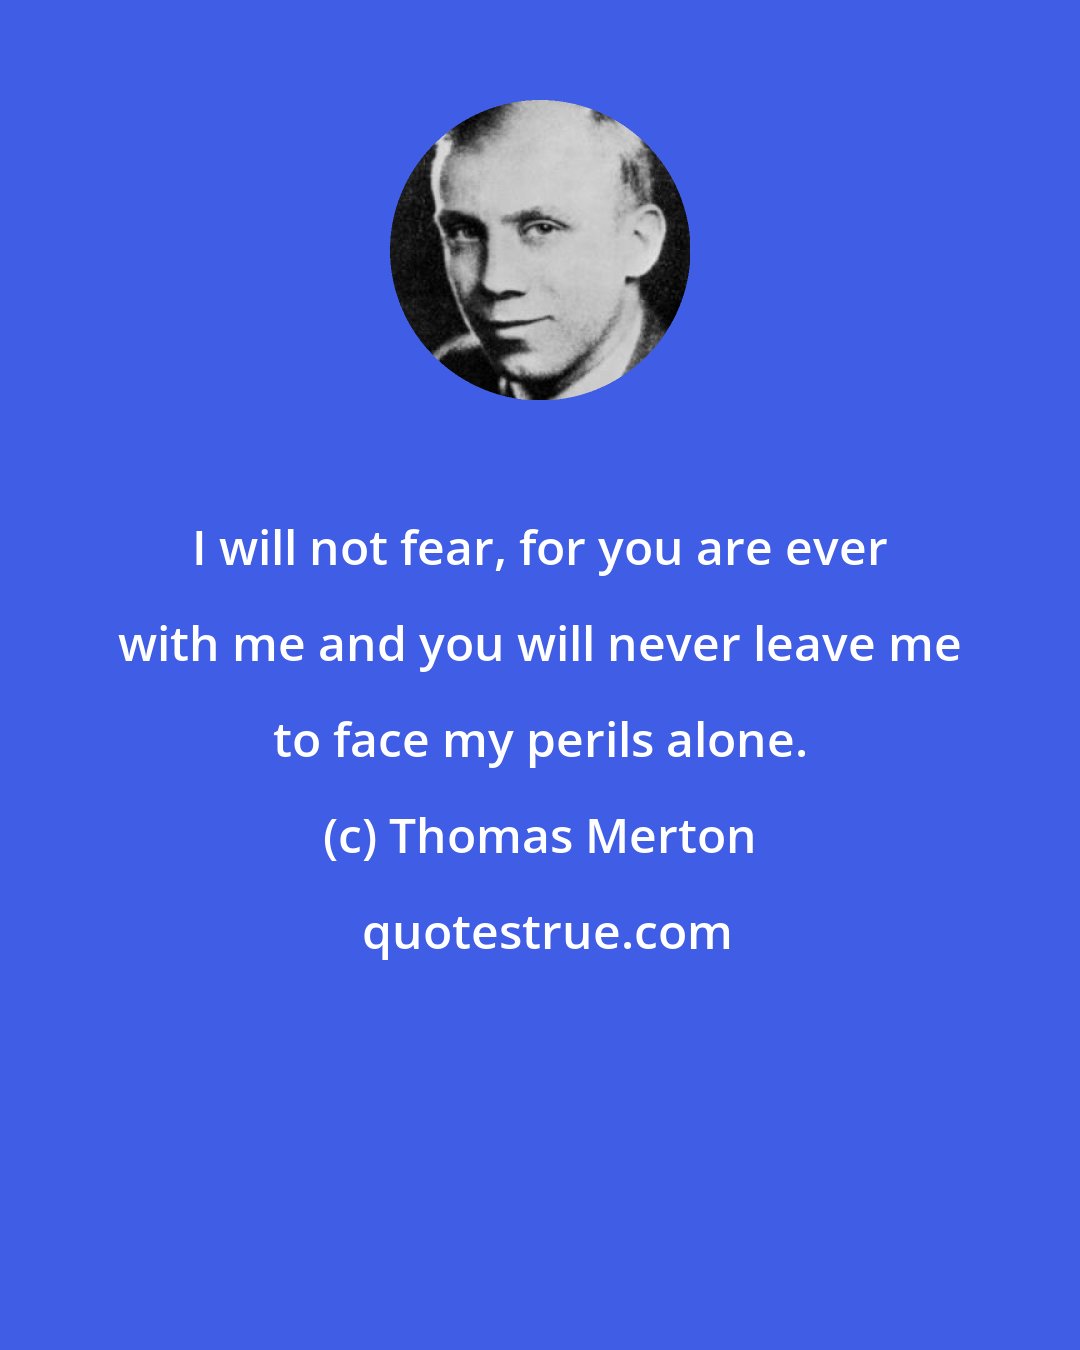 Thomas Merton: I will not fear, for you are ever with me and you will never leave me to face my perils alone.